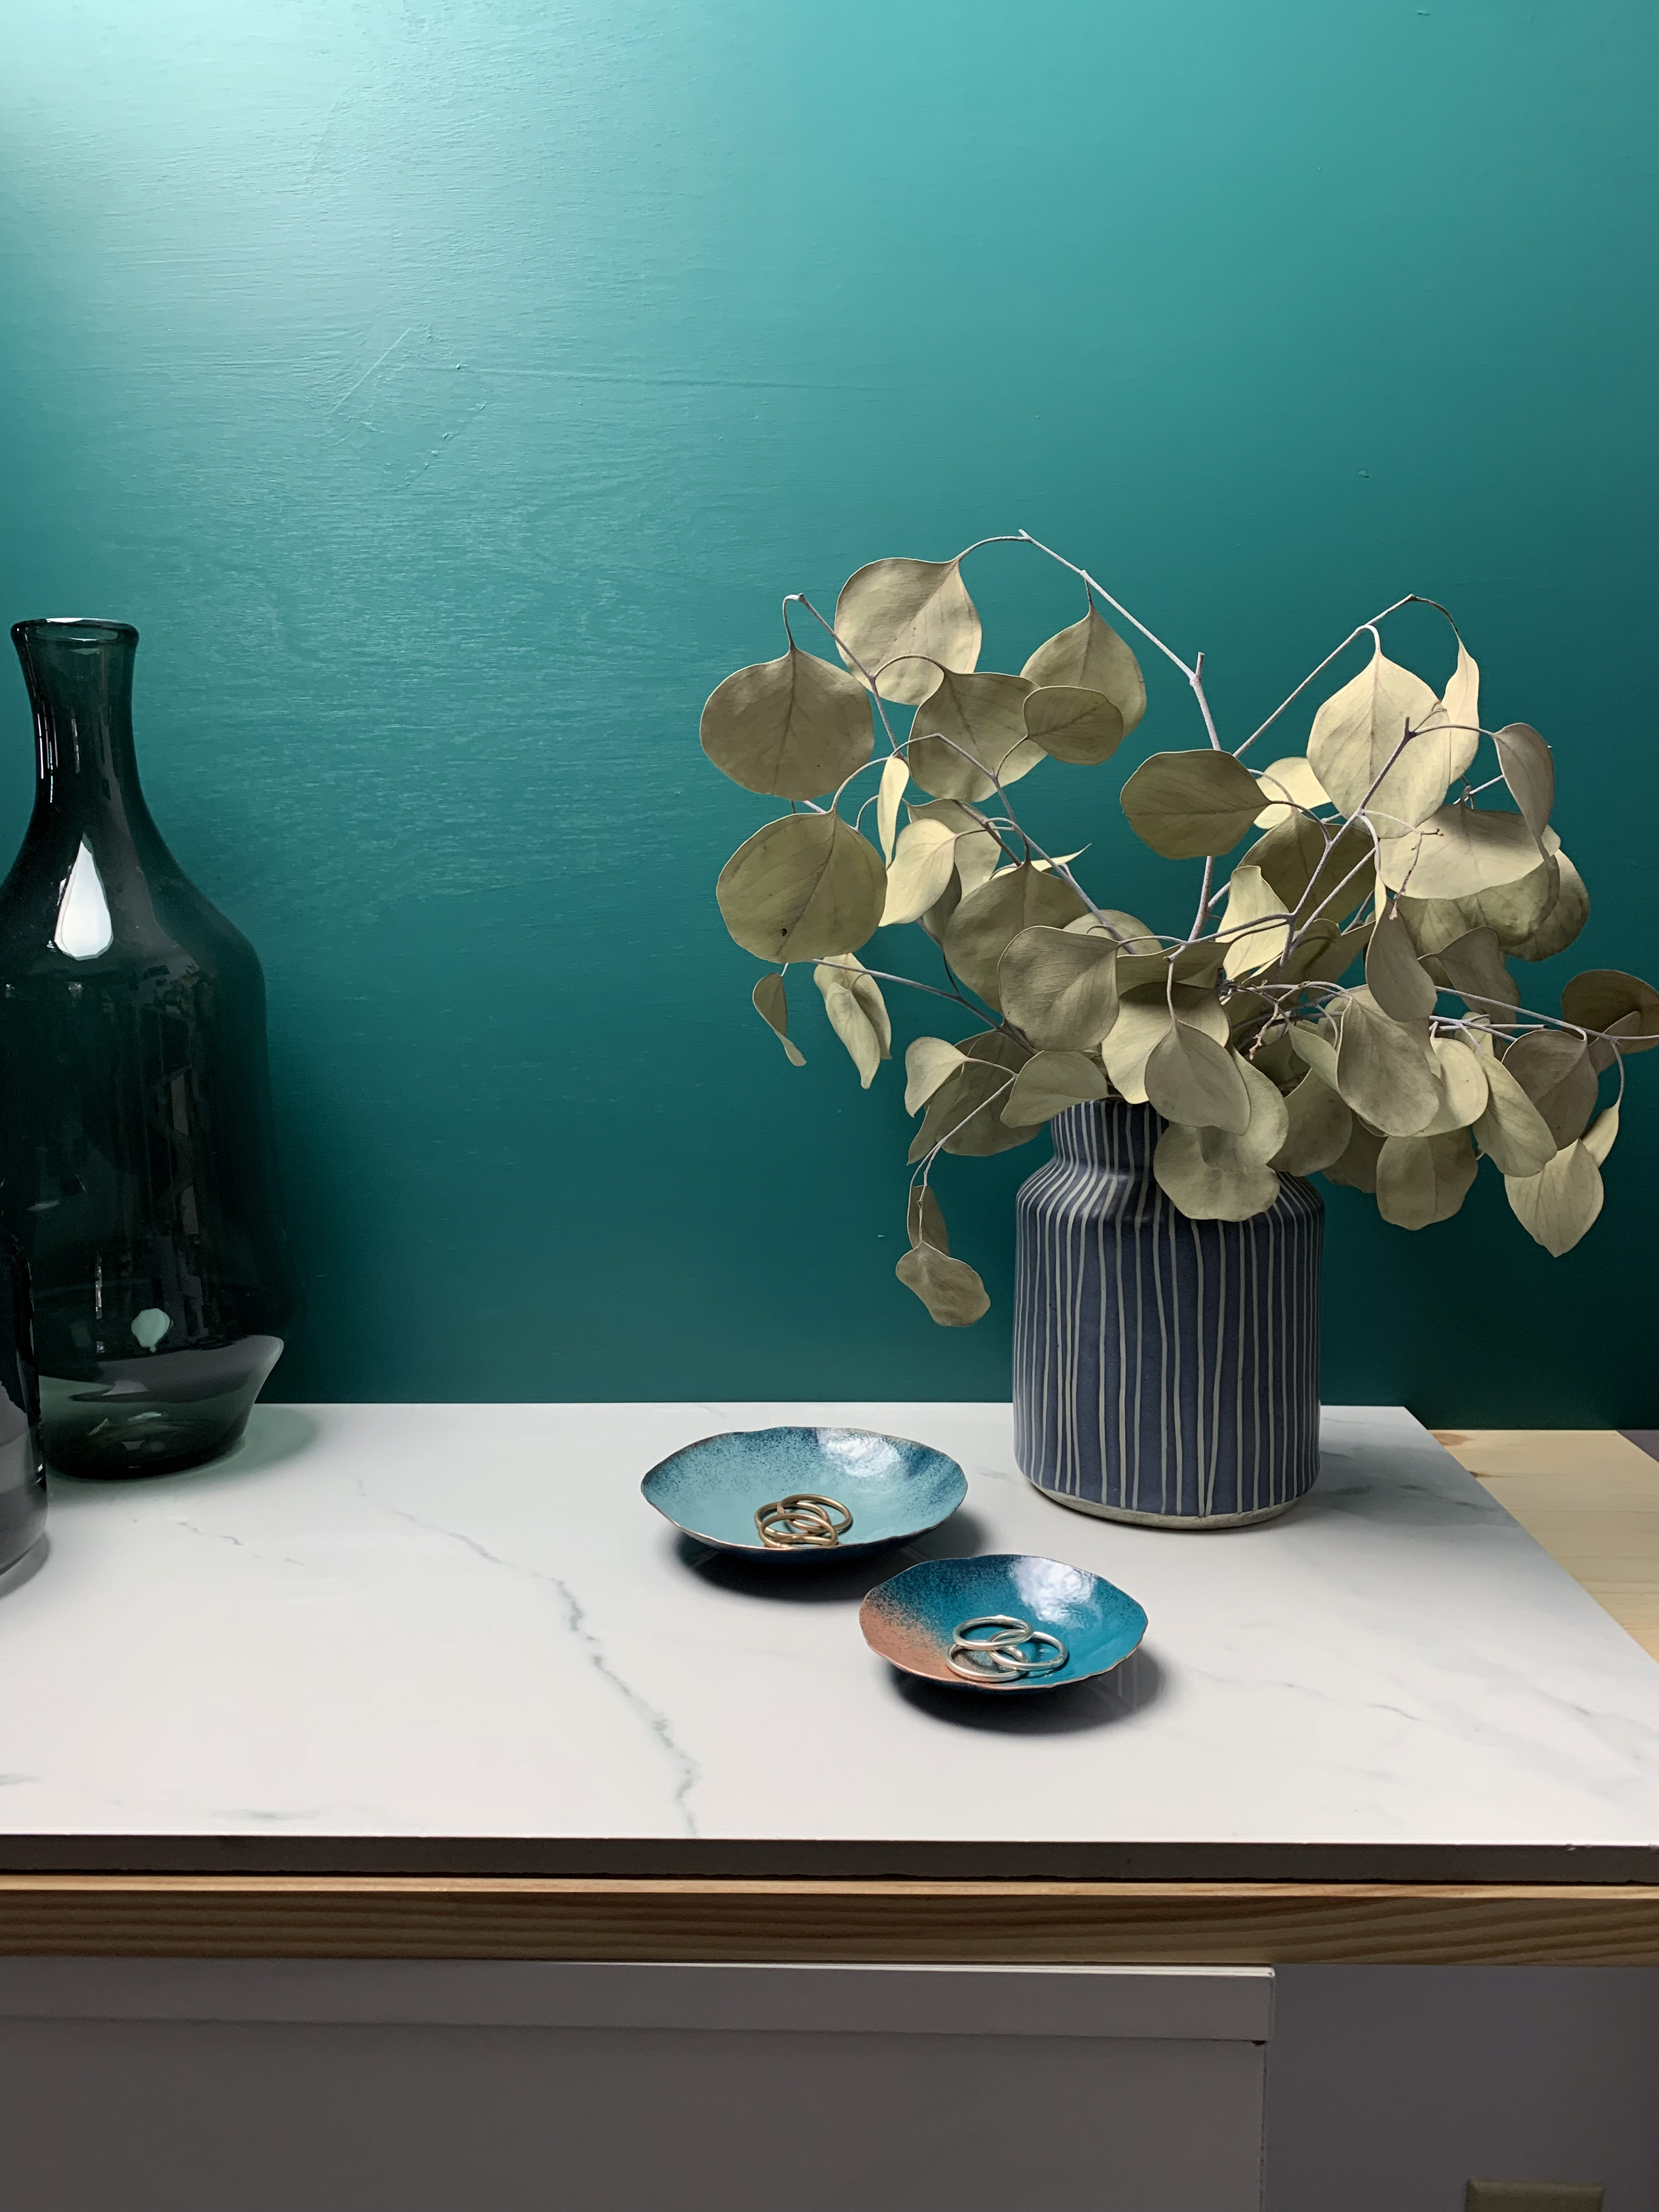 vanity countertop decor with dark teal walls: decorative metal ring dishes and vase with eucalyptus 